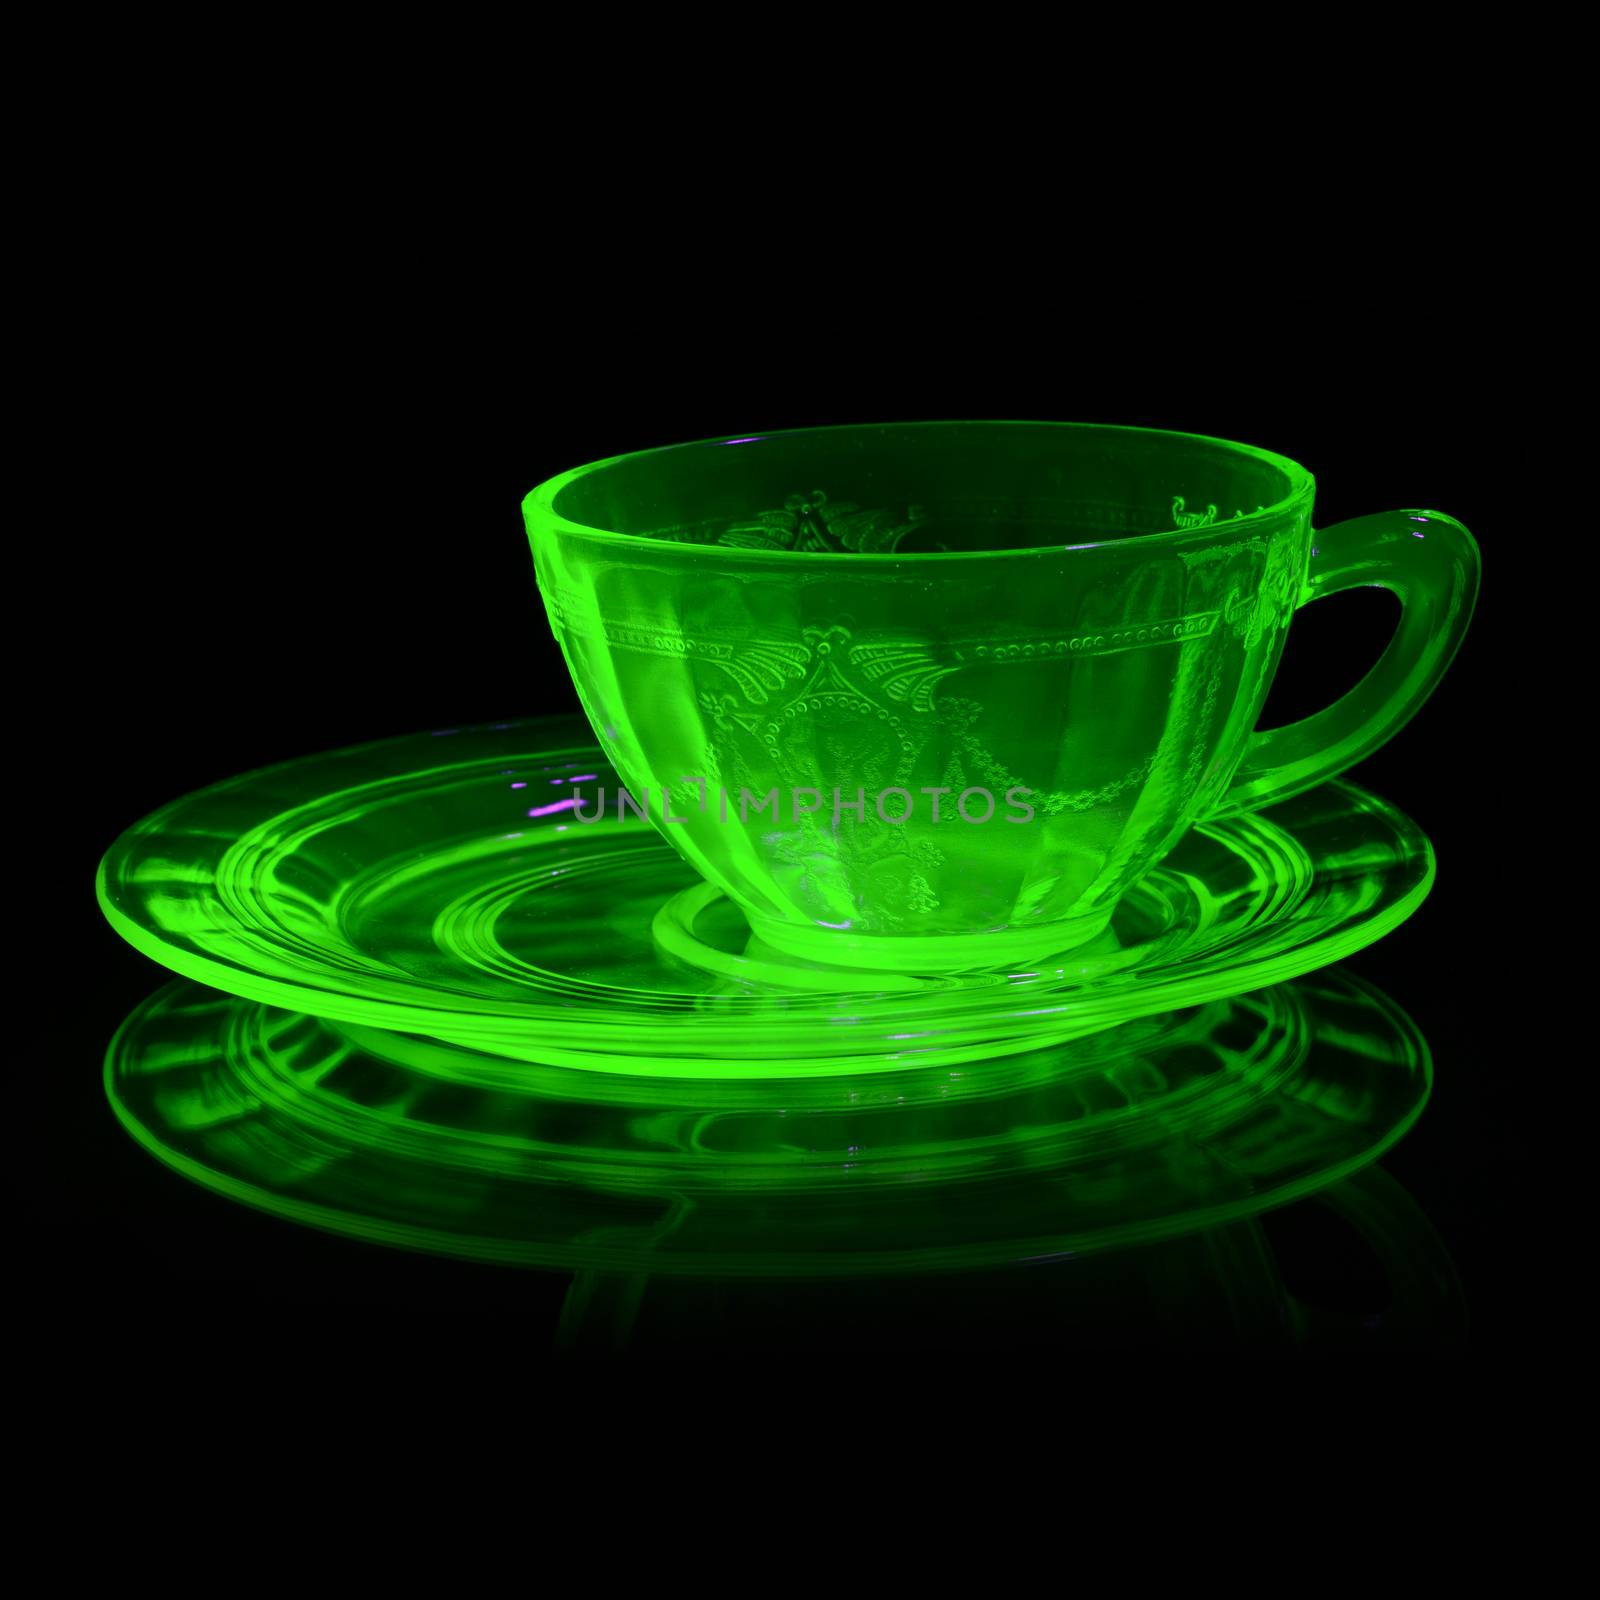 Uranium Glass Teacup by AlphaBaby